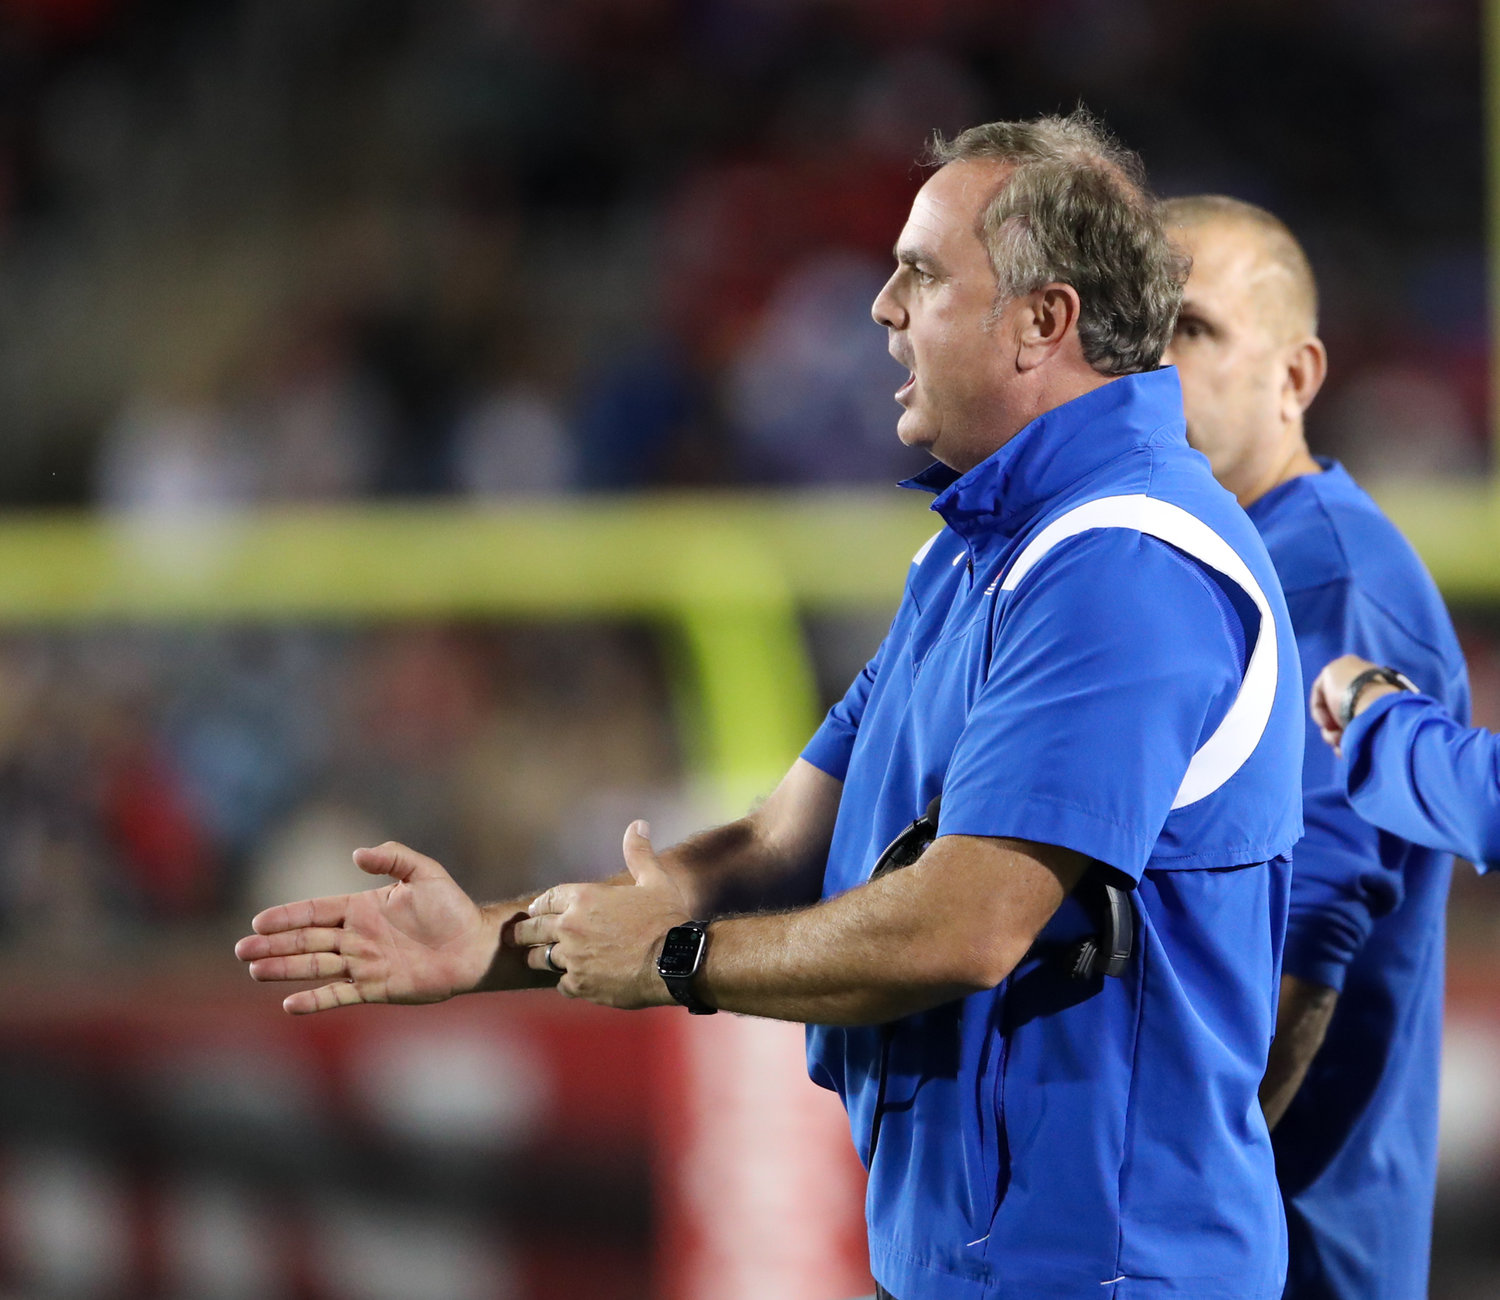 SMU Mustangs head coach Sonny Dykes argues with a game official during an NCAA football game between Houston and SMU on October 30, 2021 in Houston, Texas.